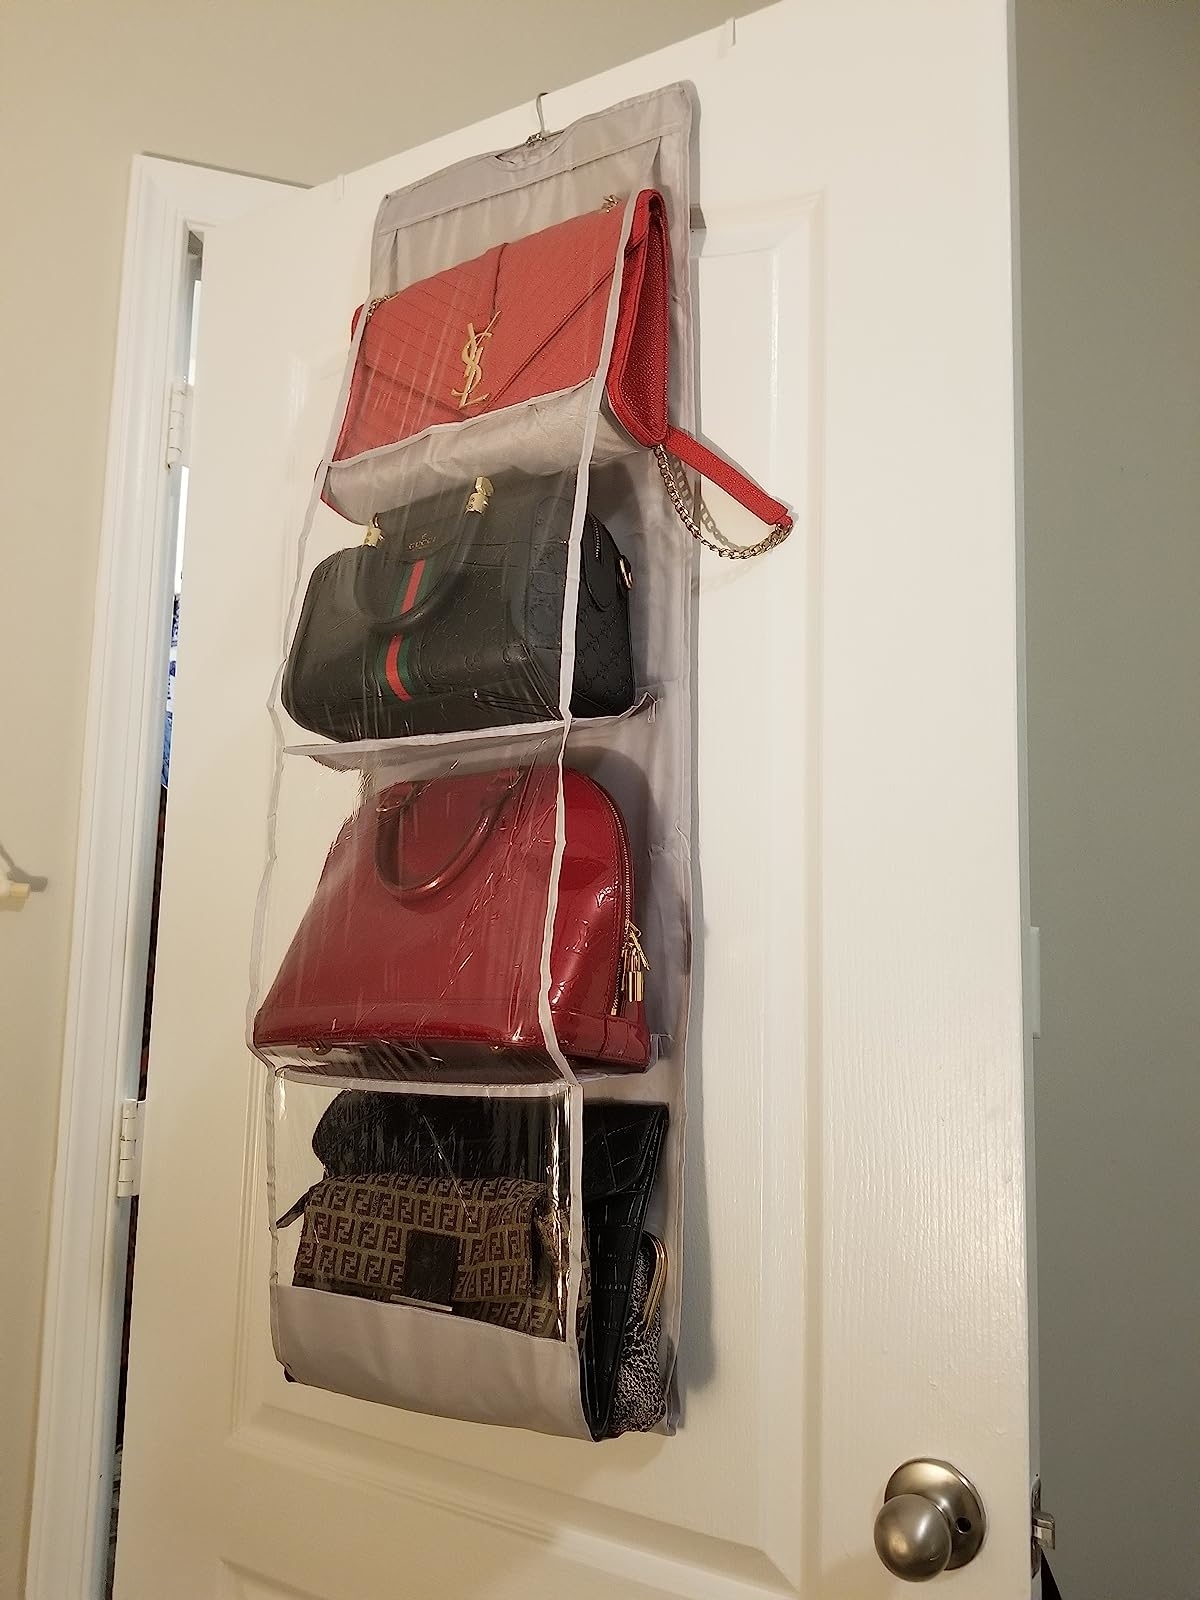 Reviewer image of bags inside the organizer hanging on a door